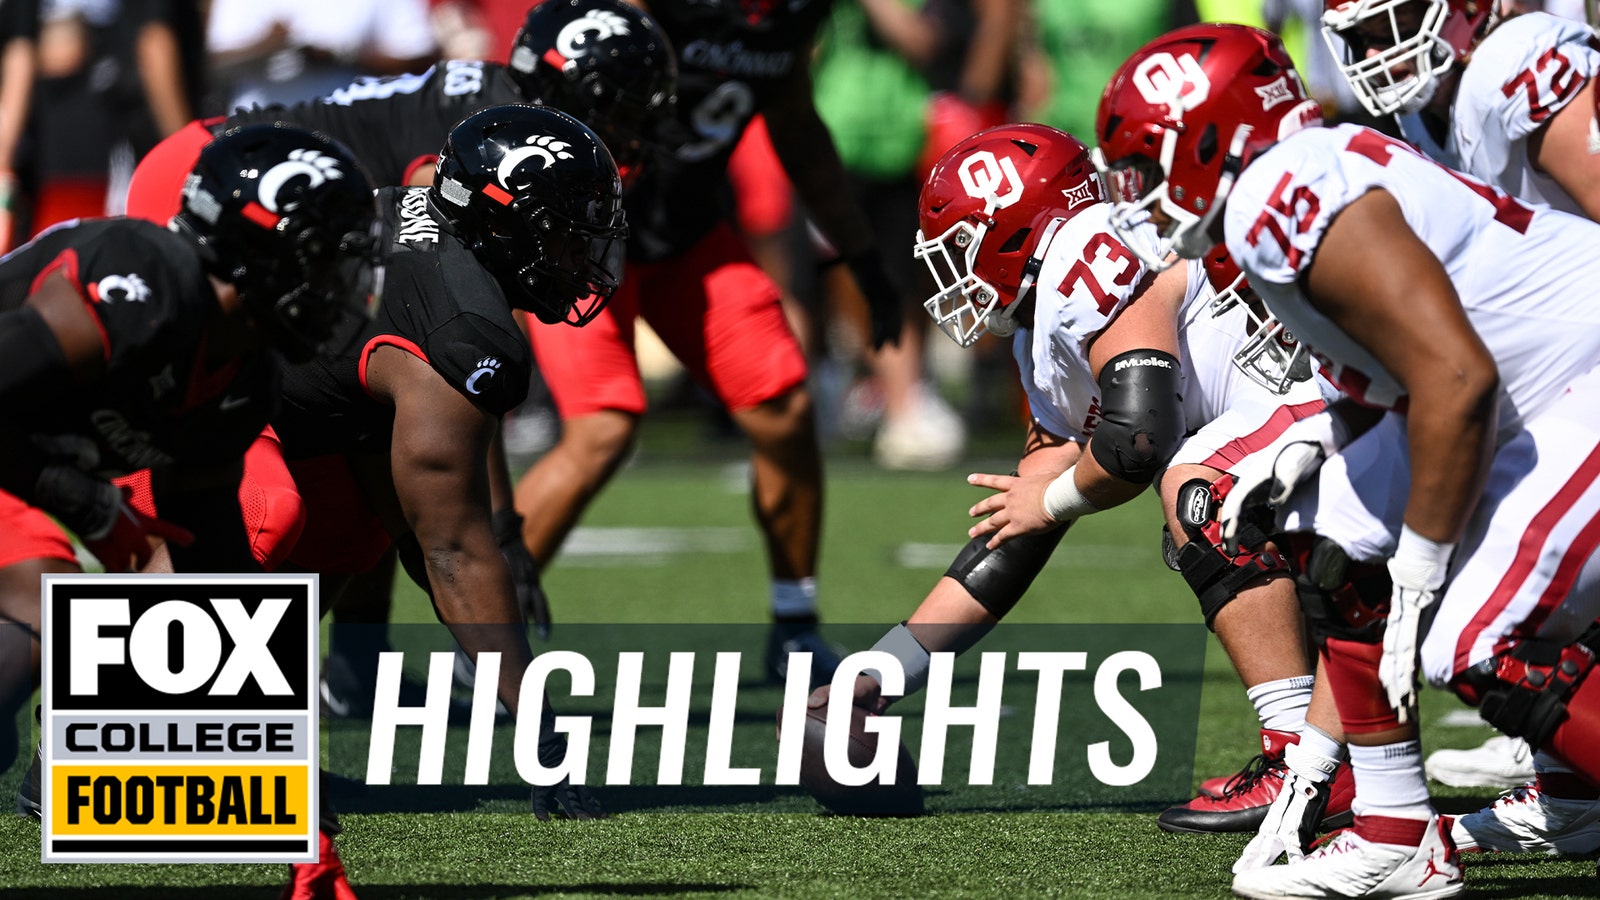 Highlights: Check out the best plays from Oklahoma vs. Cincinnati